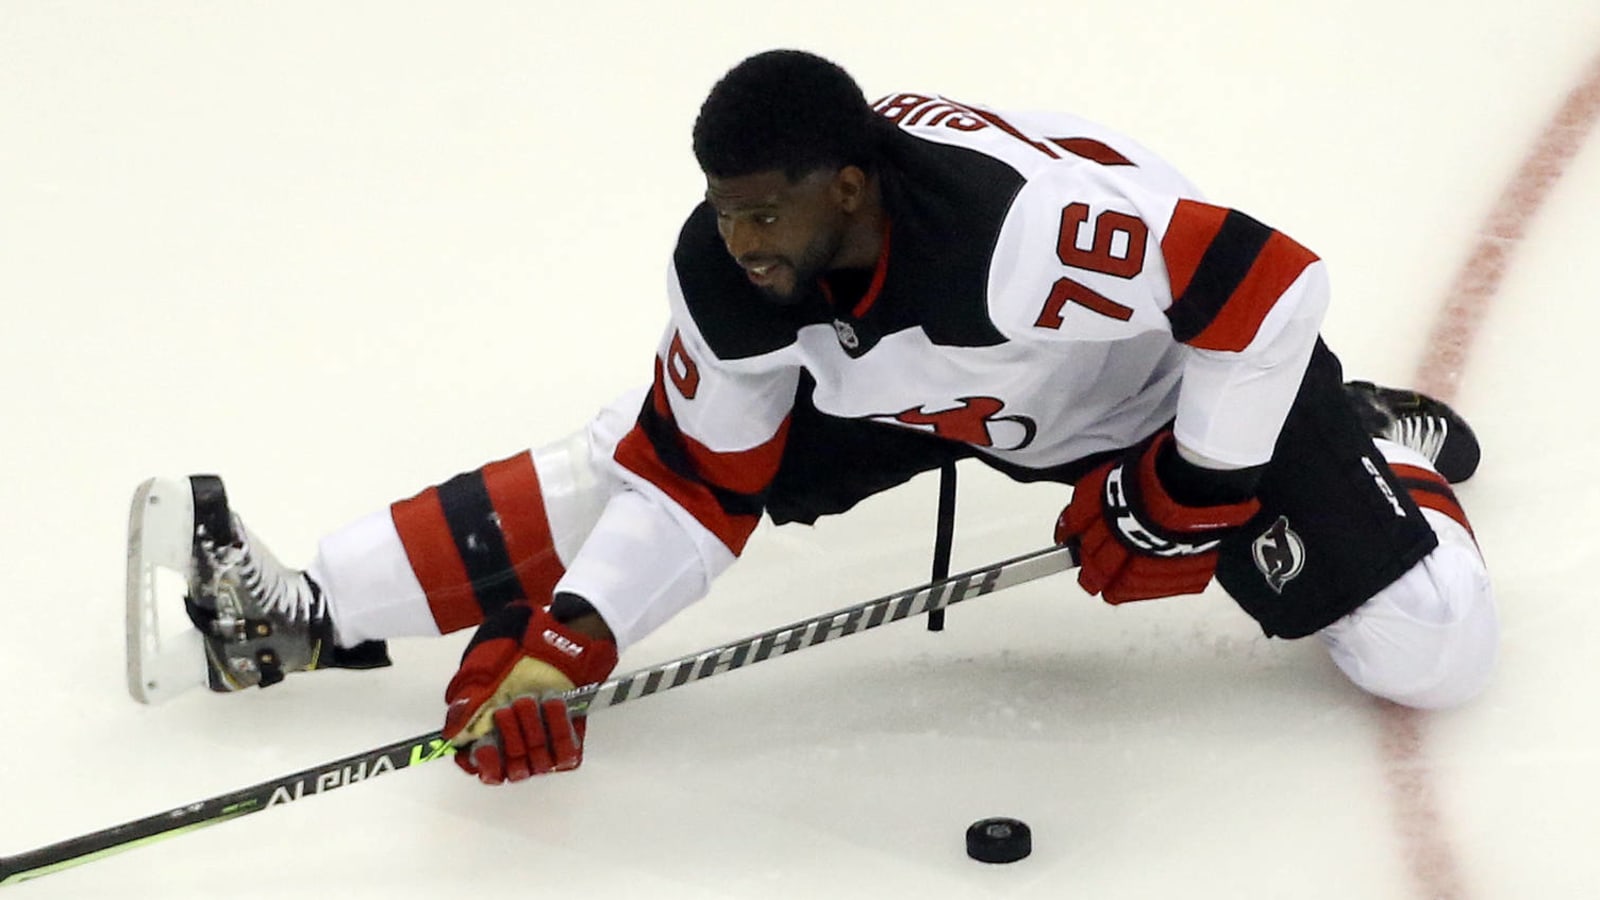 P.K. Subban fined $15K for tripping, avoids suspension